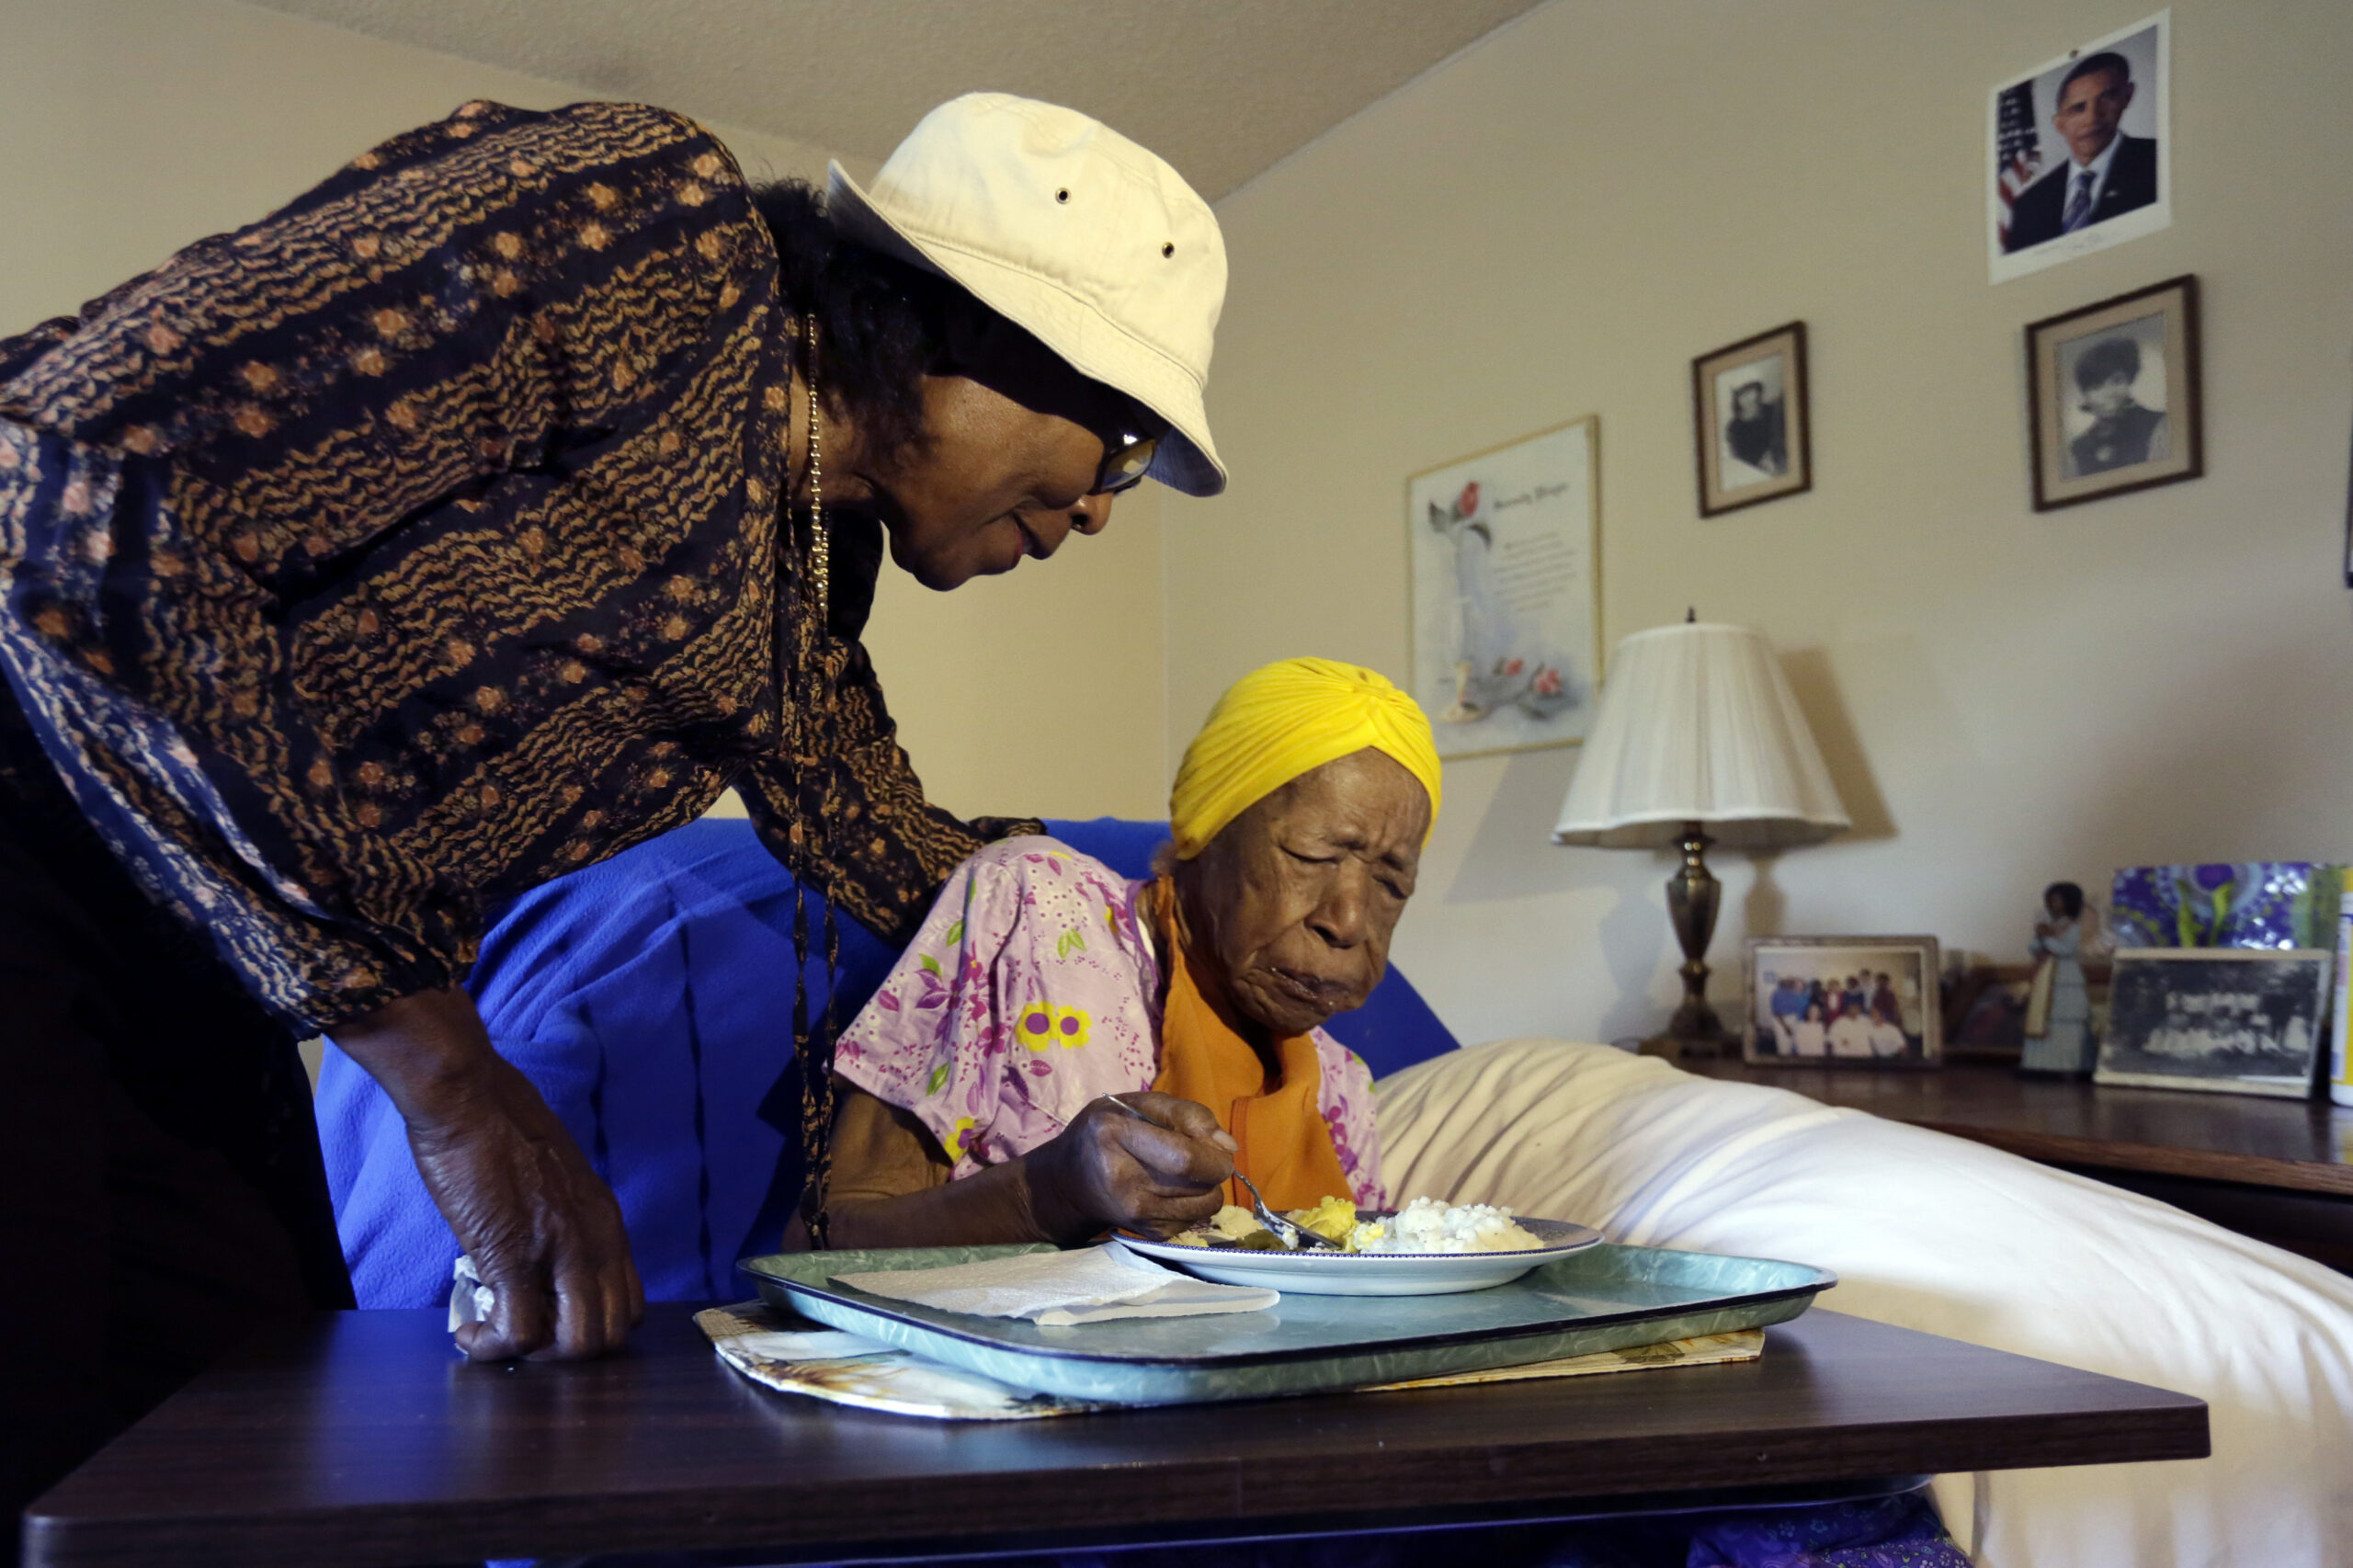 New research finds Black patients less likely to receive home health care after hospitalization